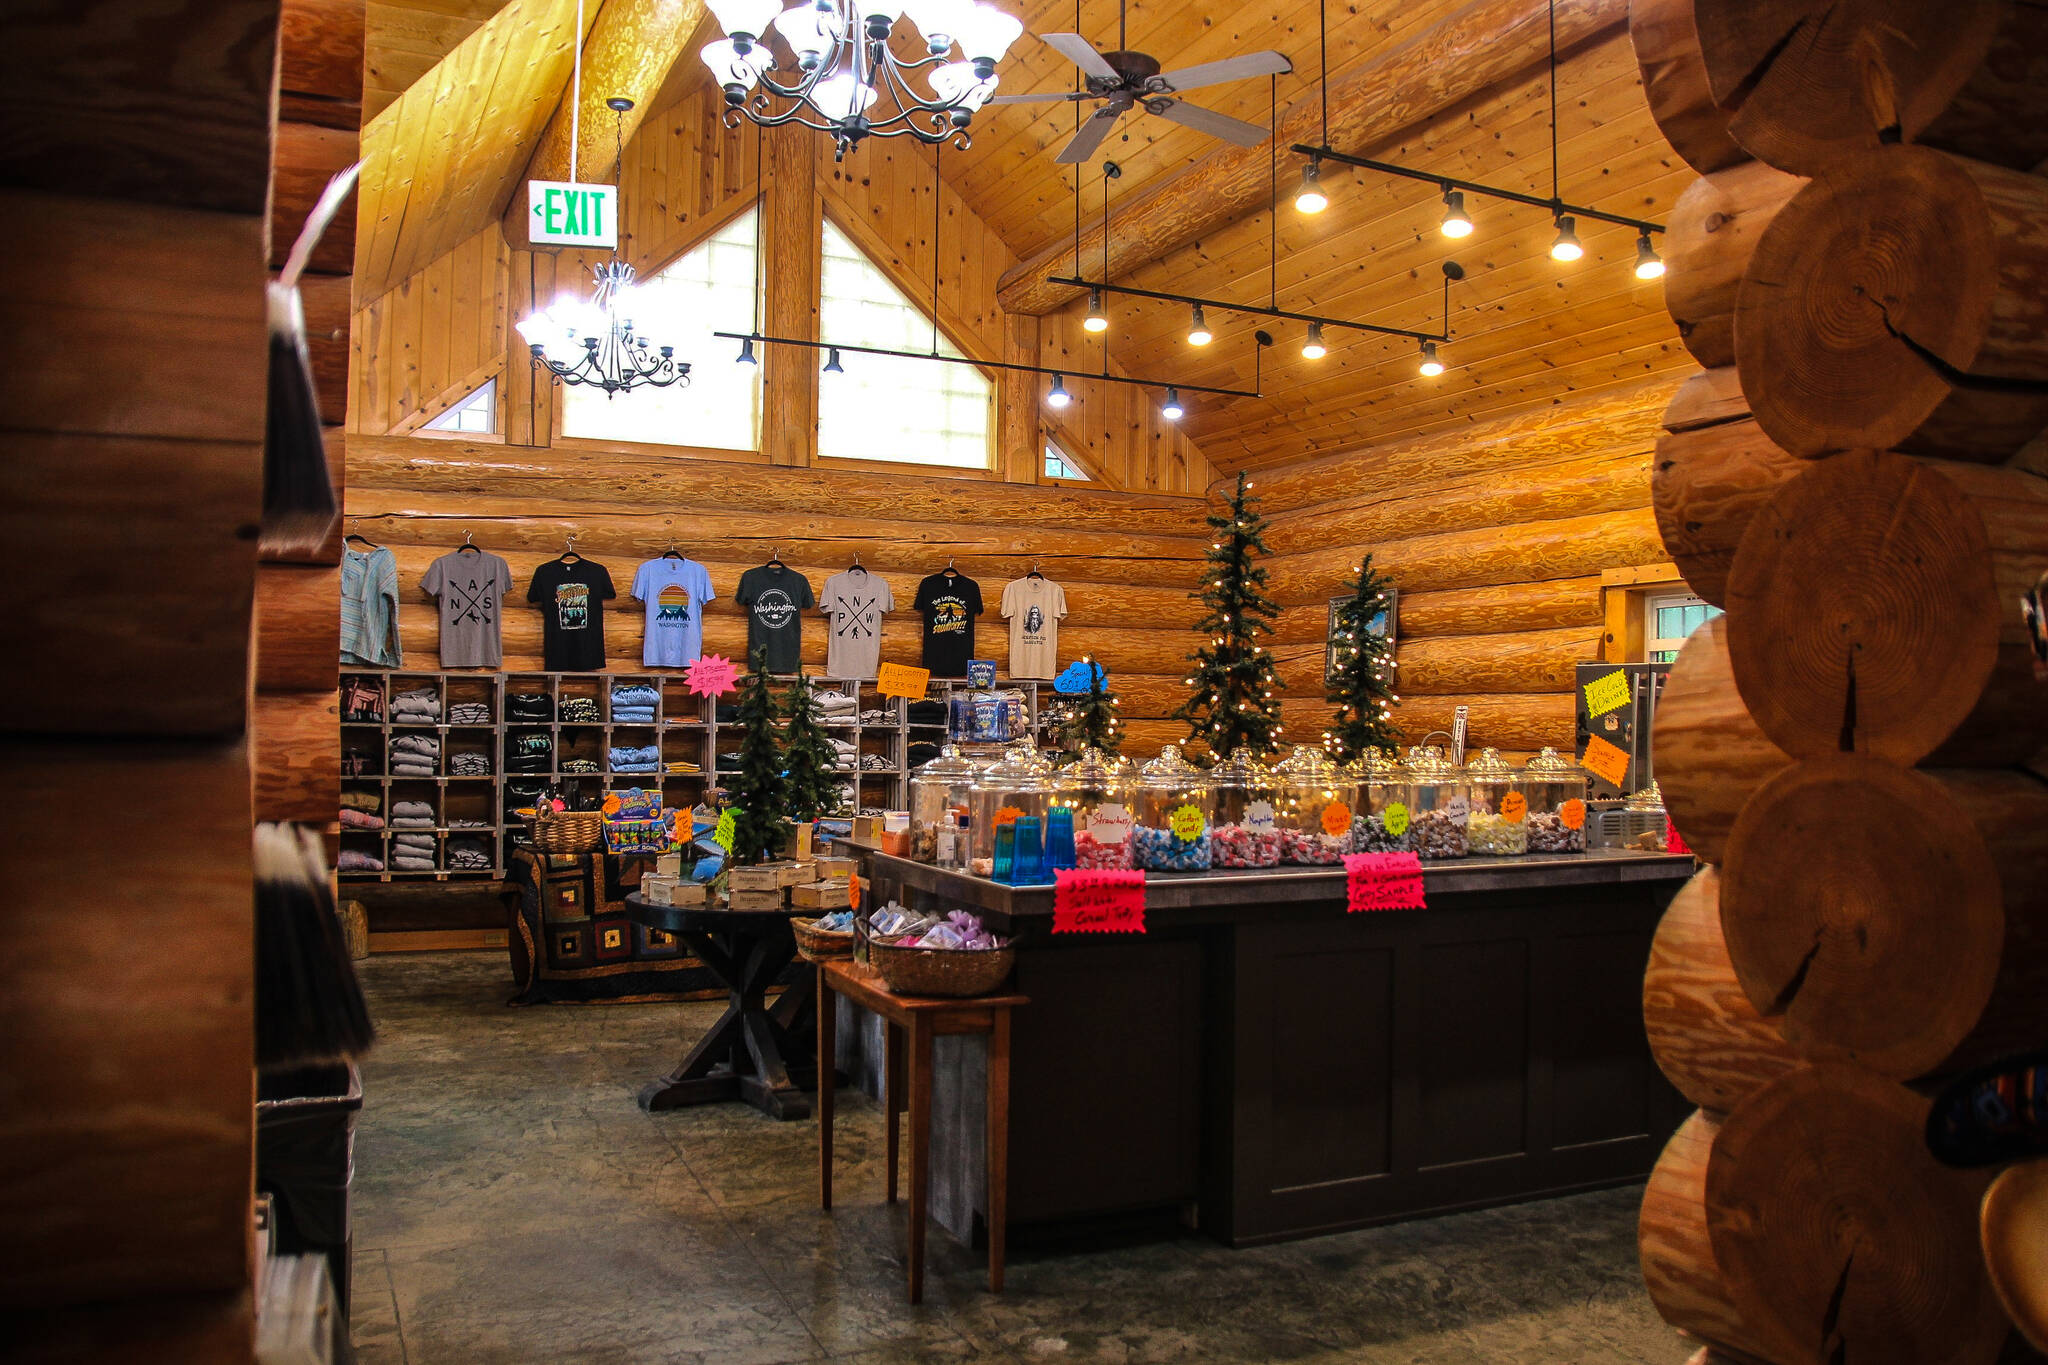 The store has kept its lodge-like interiors. (Photo by Luisa Loi/Whidbey News-Times)